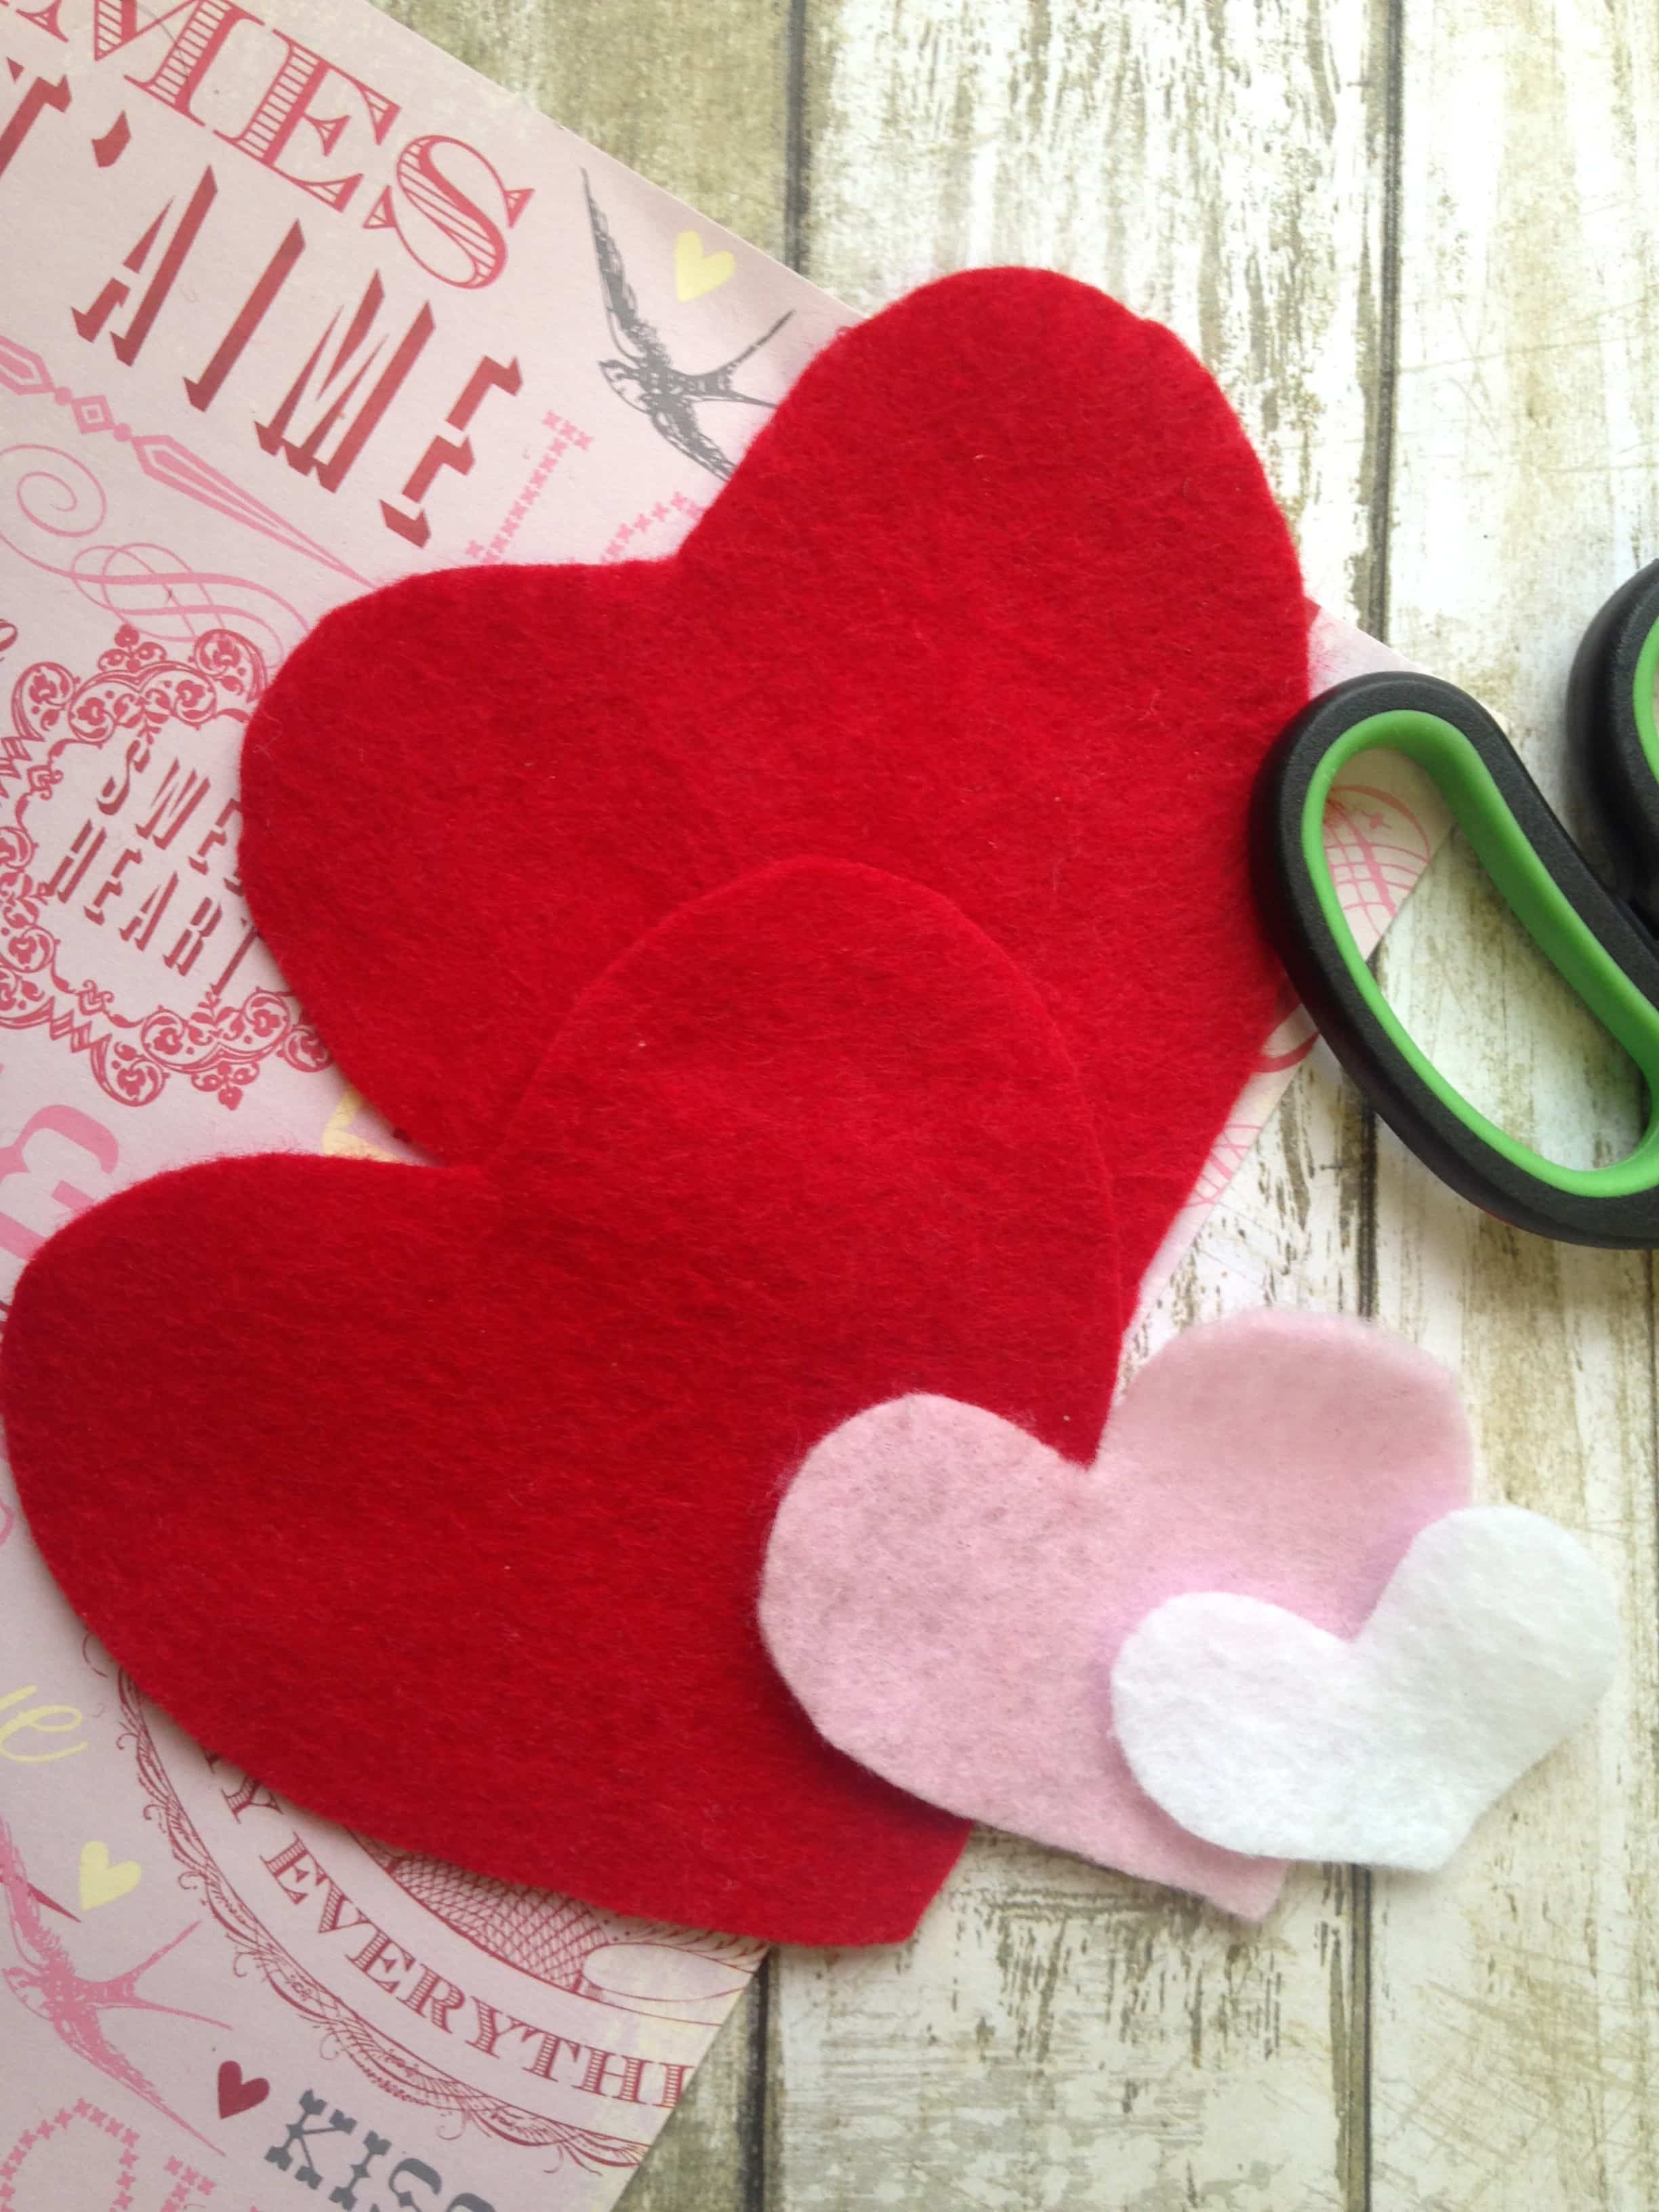 Cut felt hearts from 3 different colors of felt to make this essential oil scented Felt Heart Sachet 